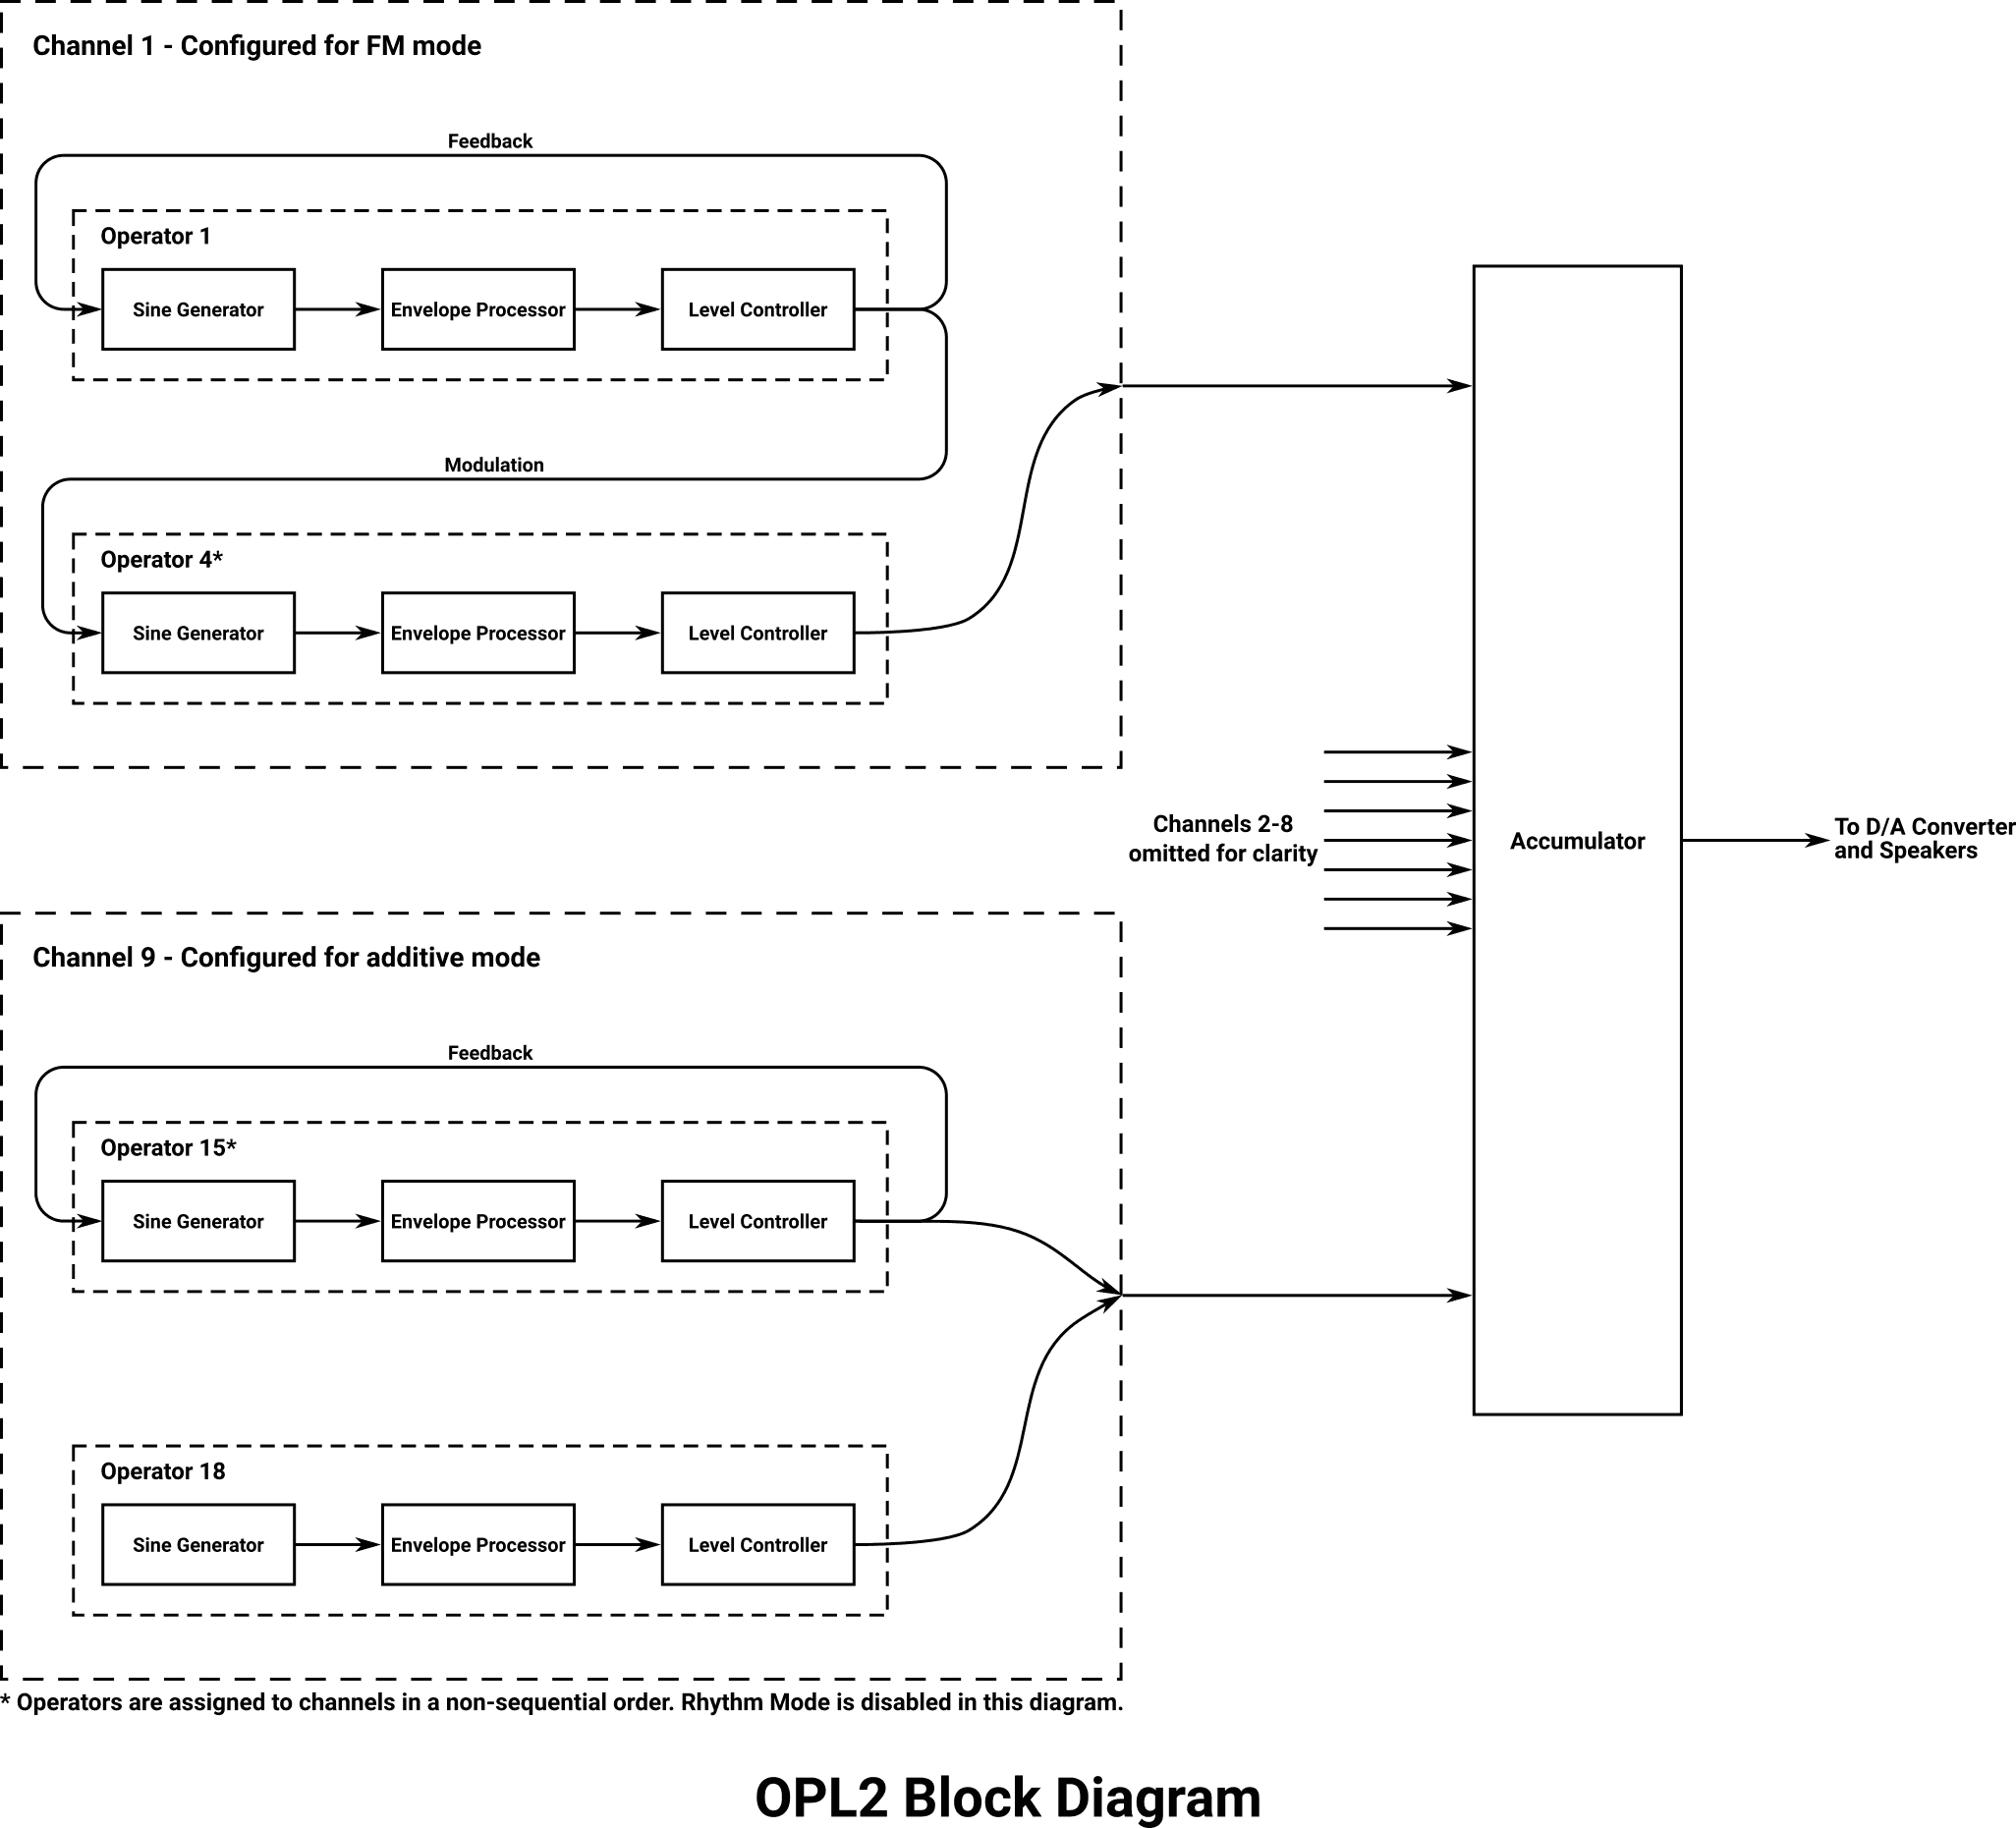 Block diagram showing two (of nine) channels available in the OPL2.